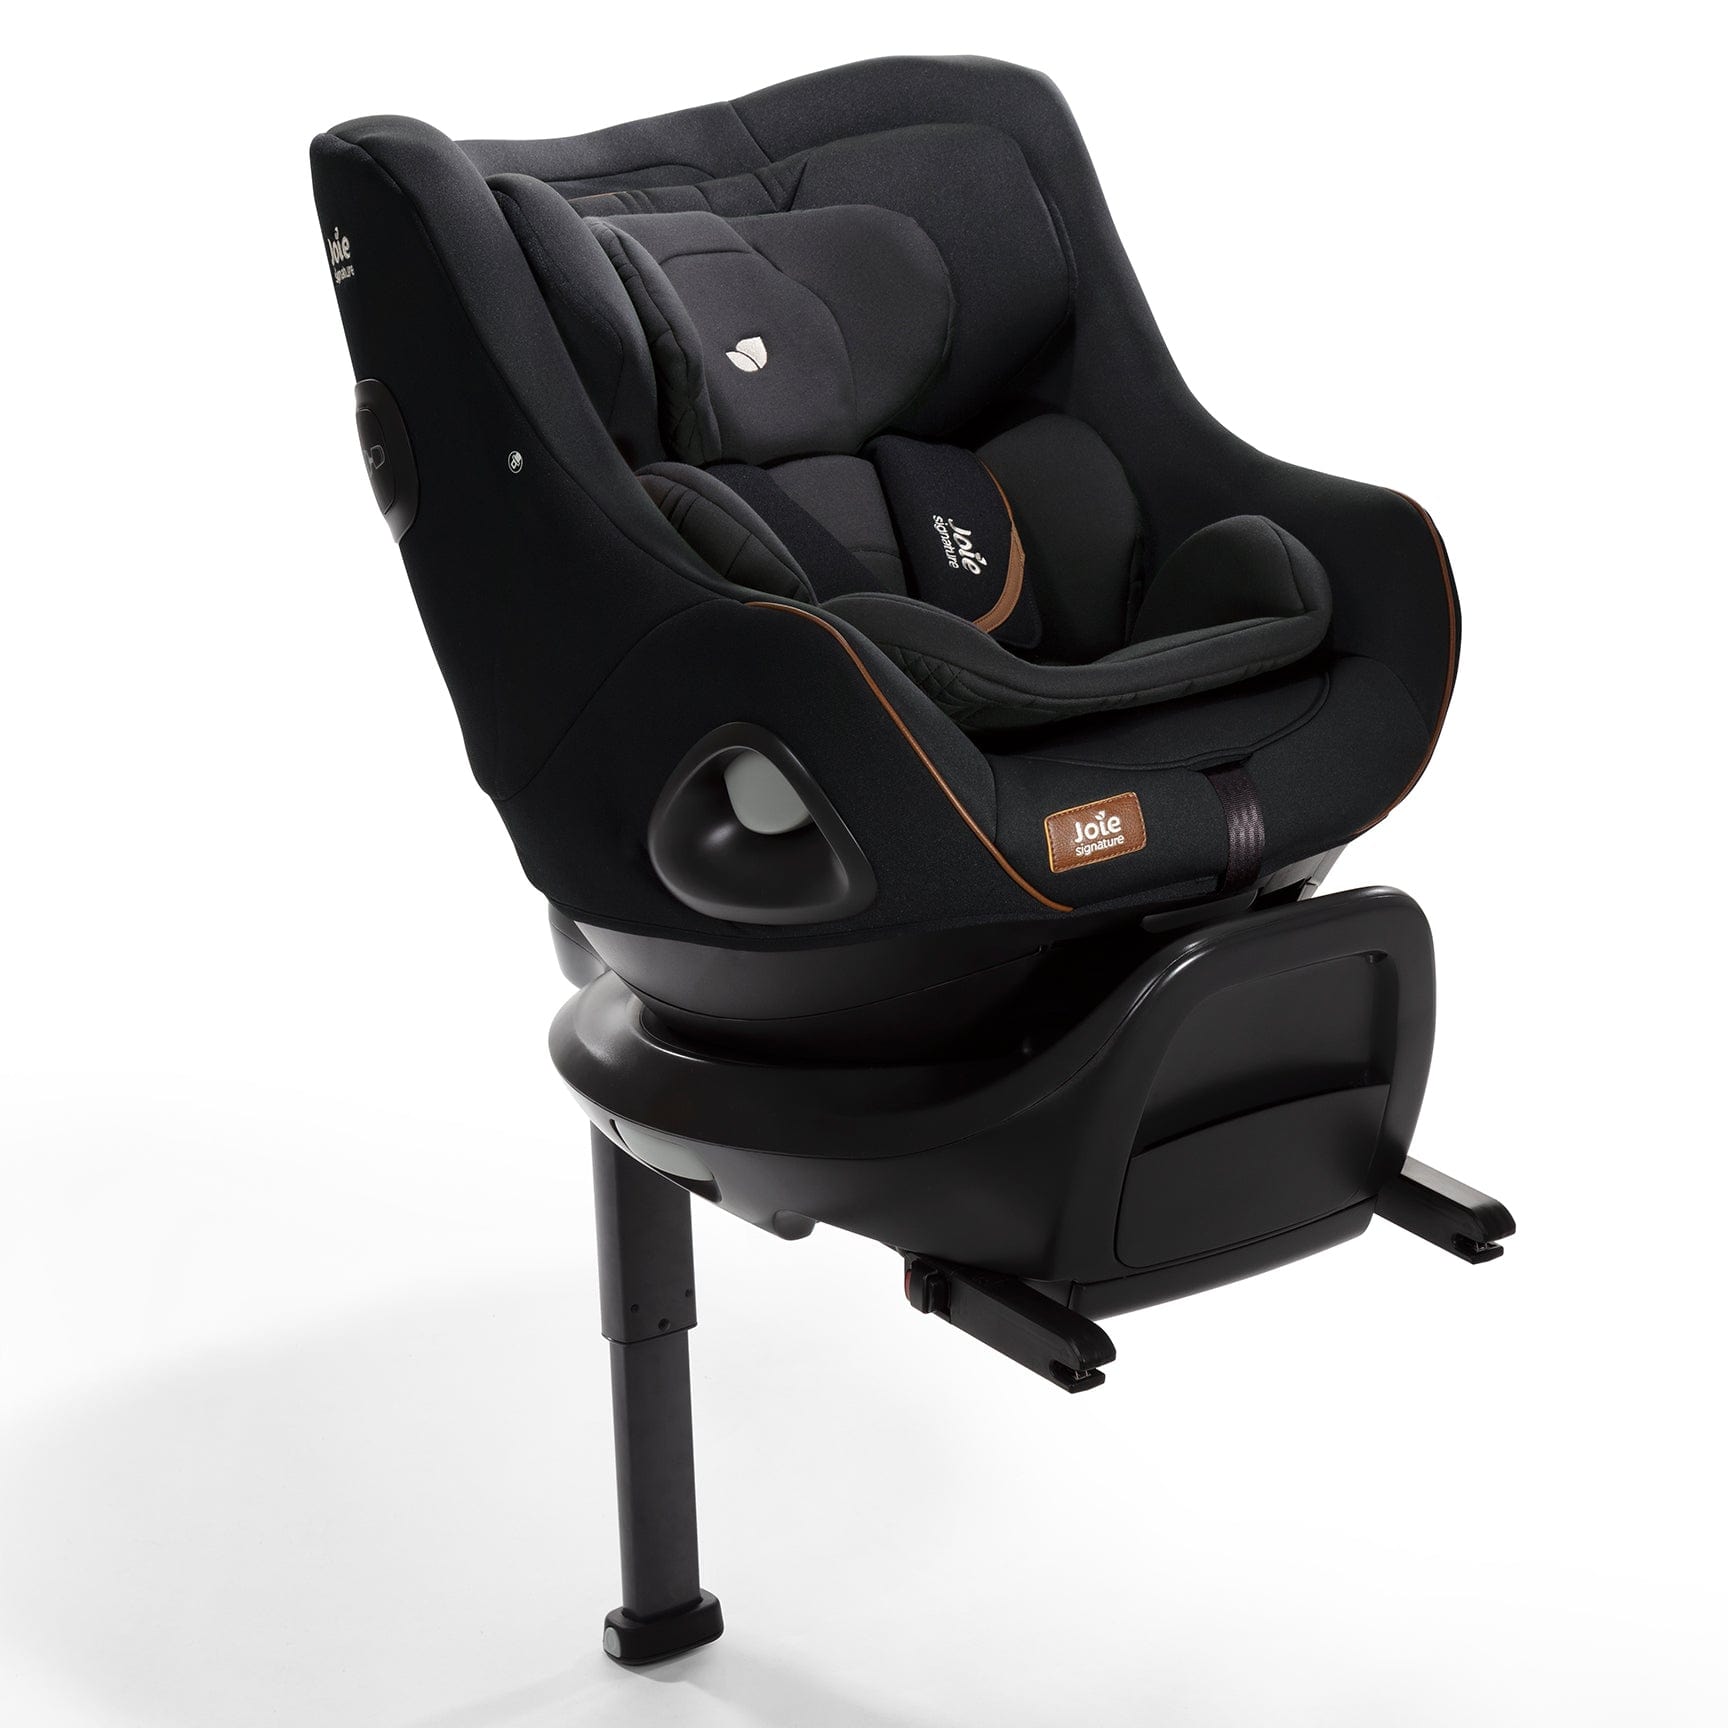 Joie i-Harbour and i-Base Encore in Eclipse Swivel Car Seats 12220-ECL 5056080612454